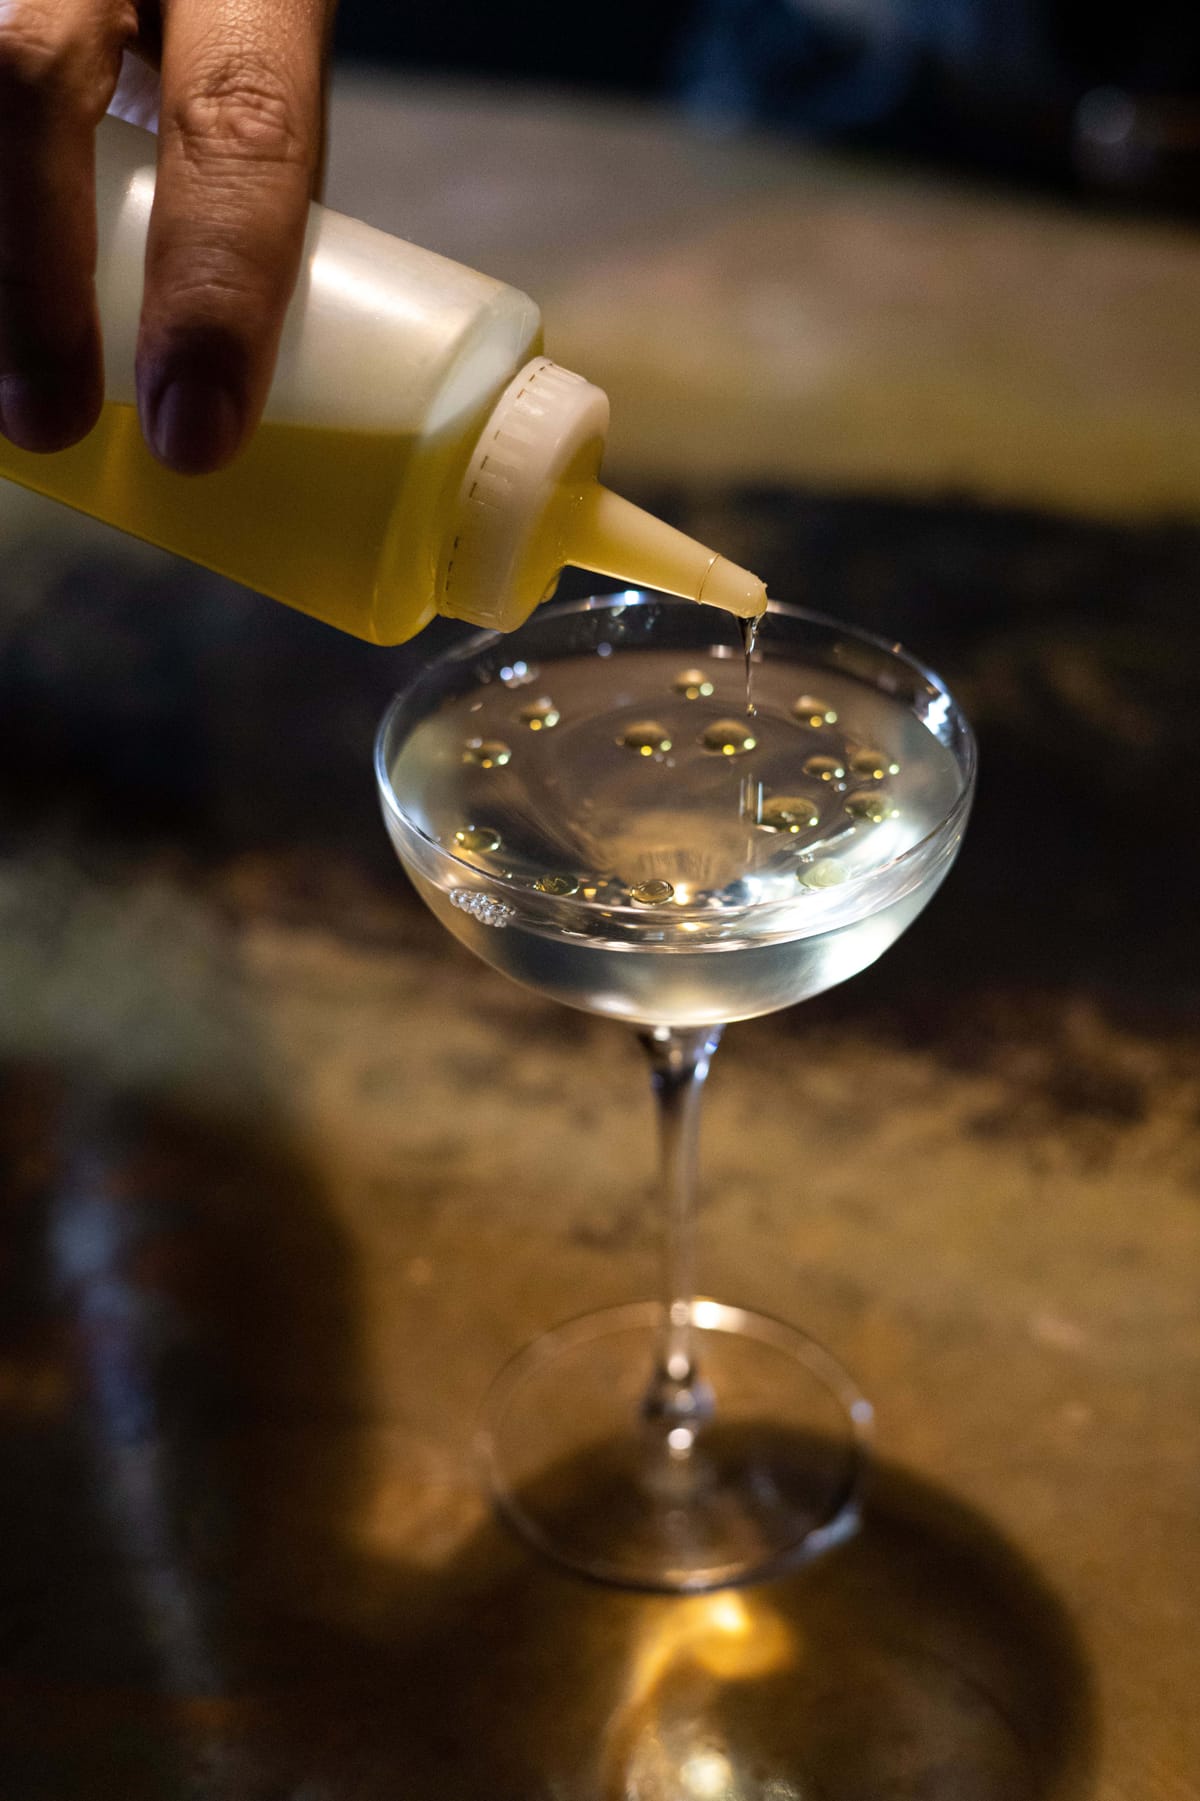 Get the recipe for the corn and mezcal led Martini-style drink, Coil, from Maker